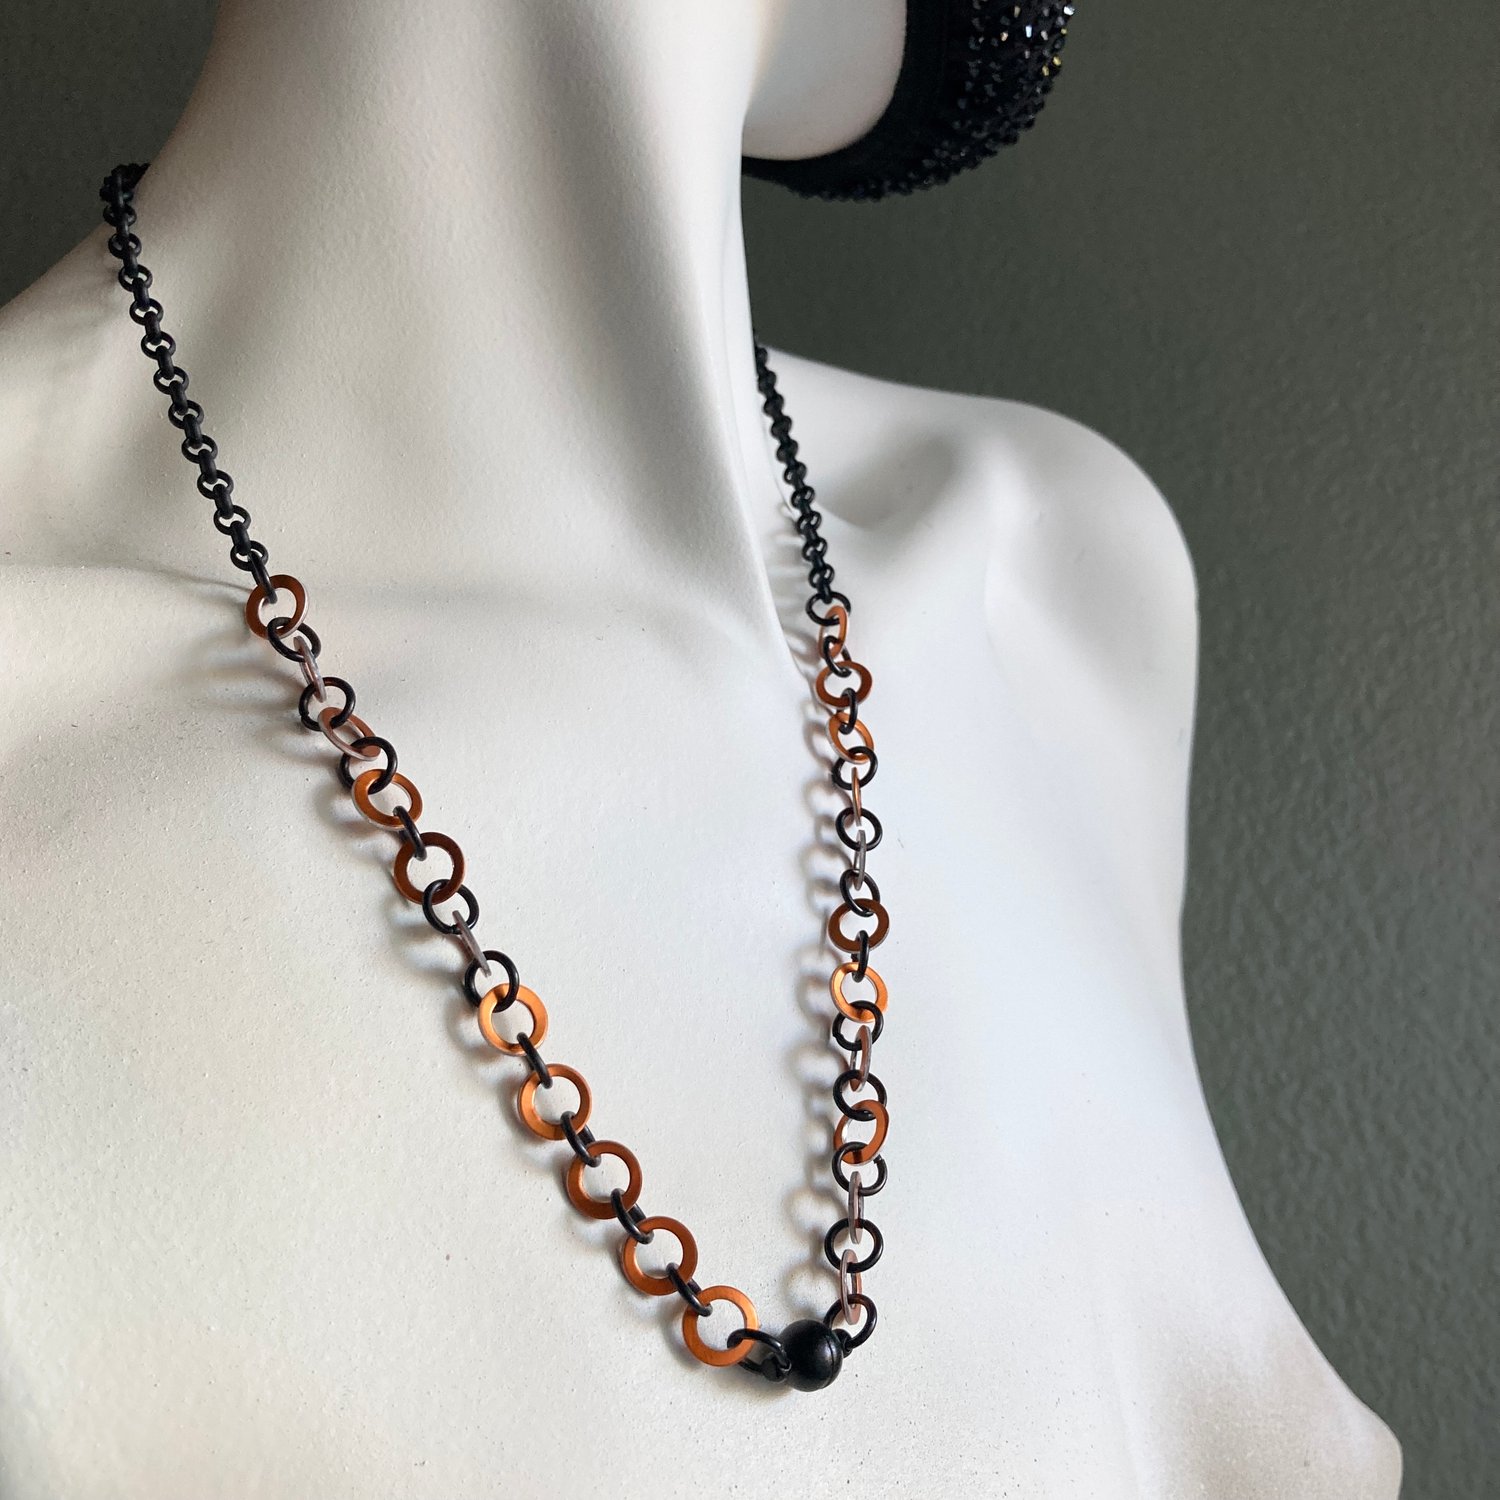 Image of 22" Matte Black & Orange Convertible Necklace/Mask Chain with Matte Black Ball Magnet Clasp